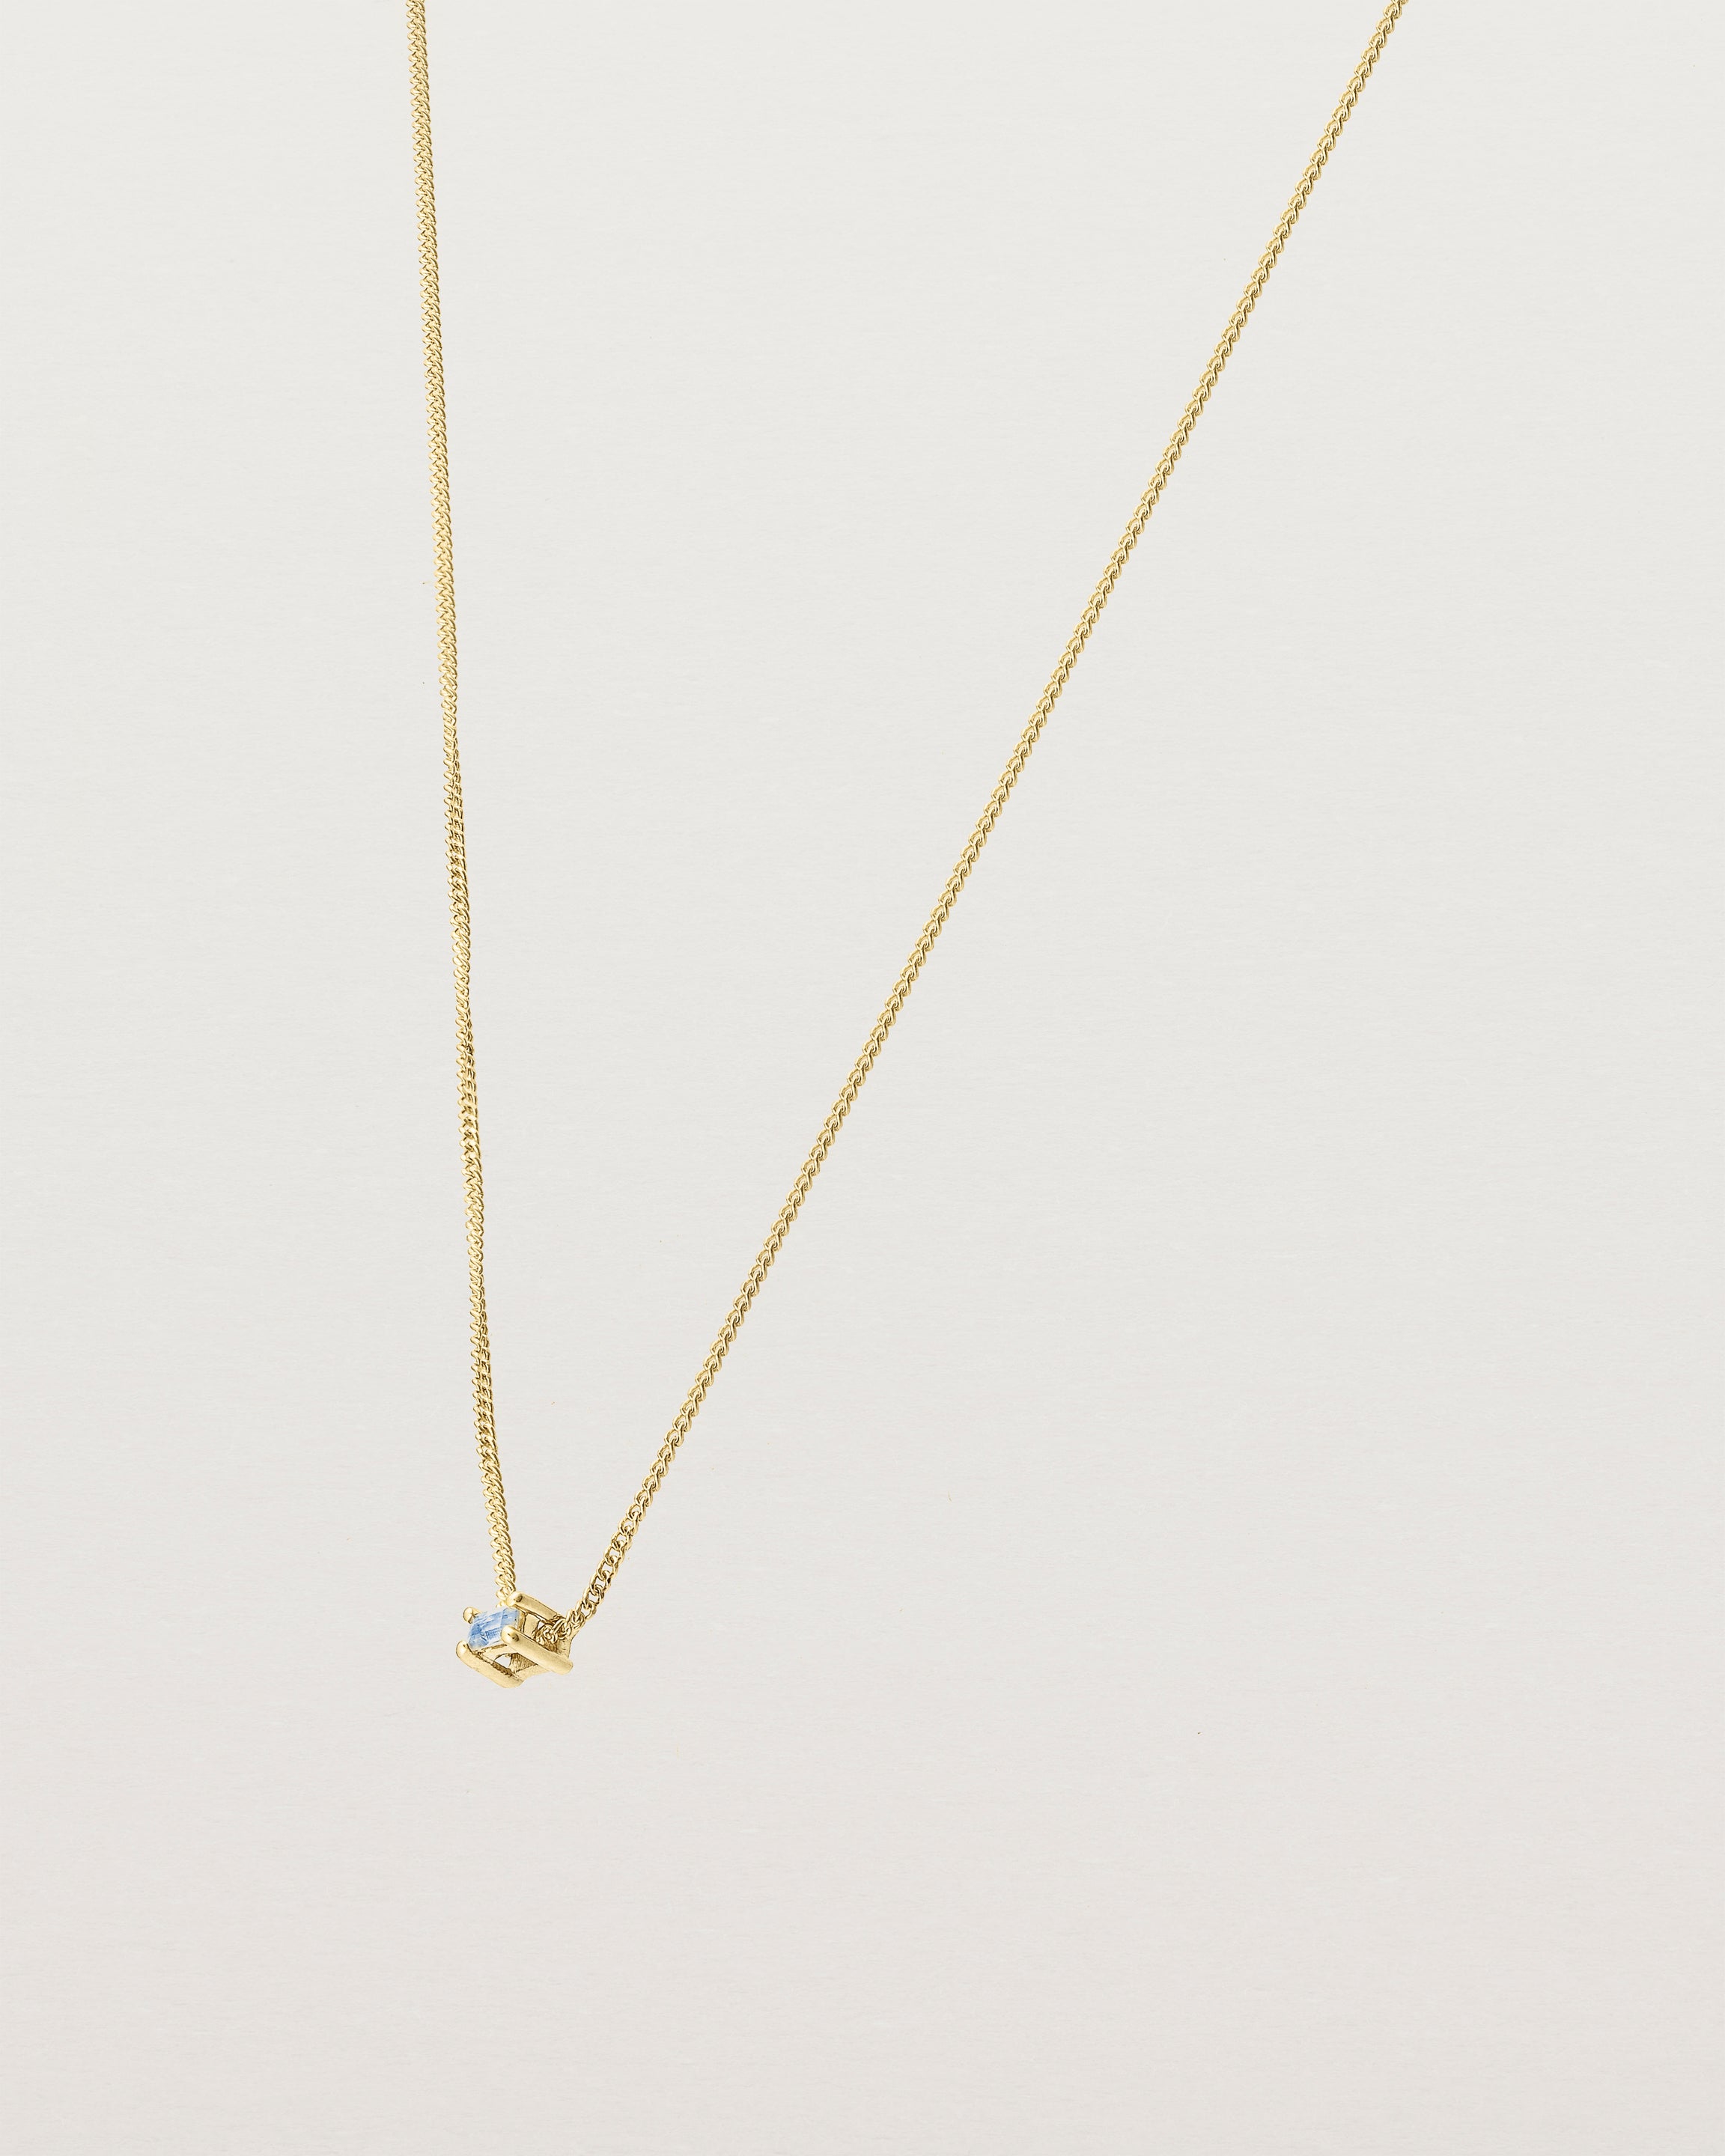 Angled view of the Sena Slider Necklace with Pale Blue Sapphire in yellow gold.